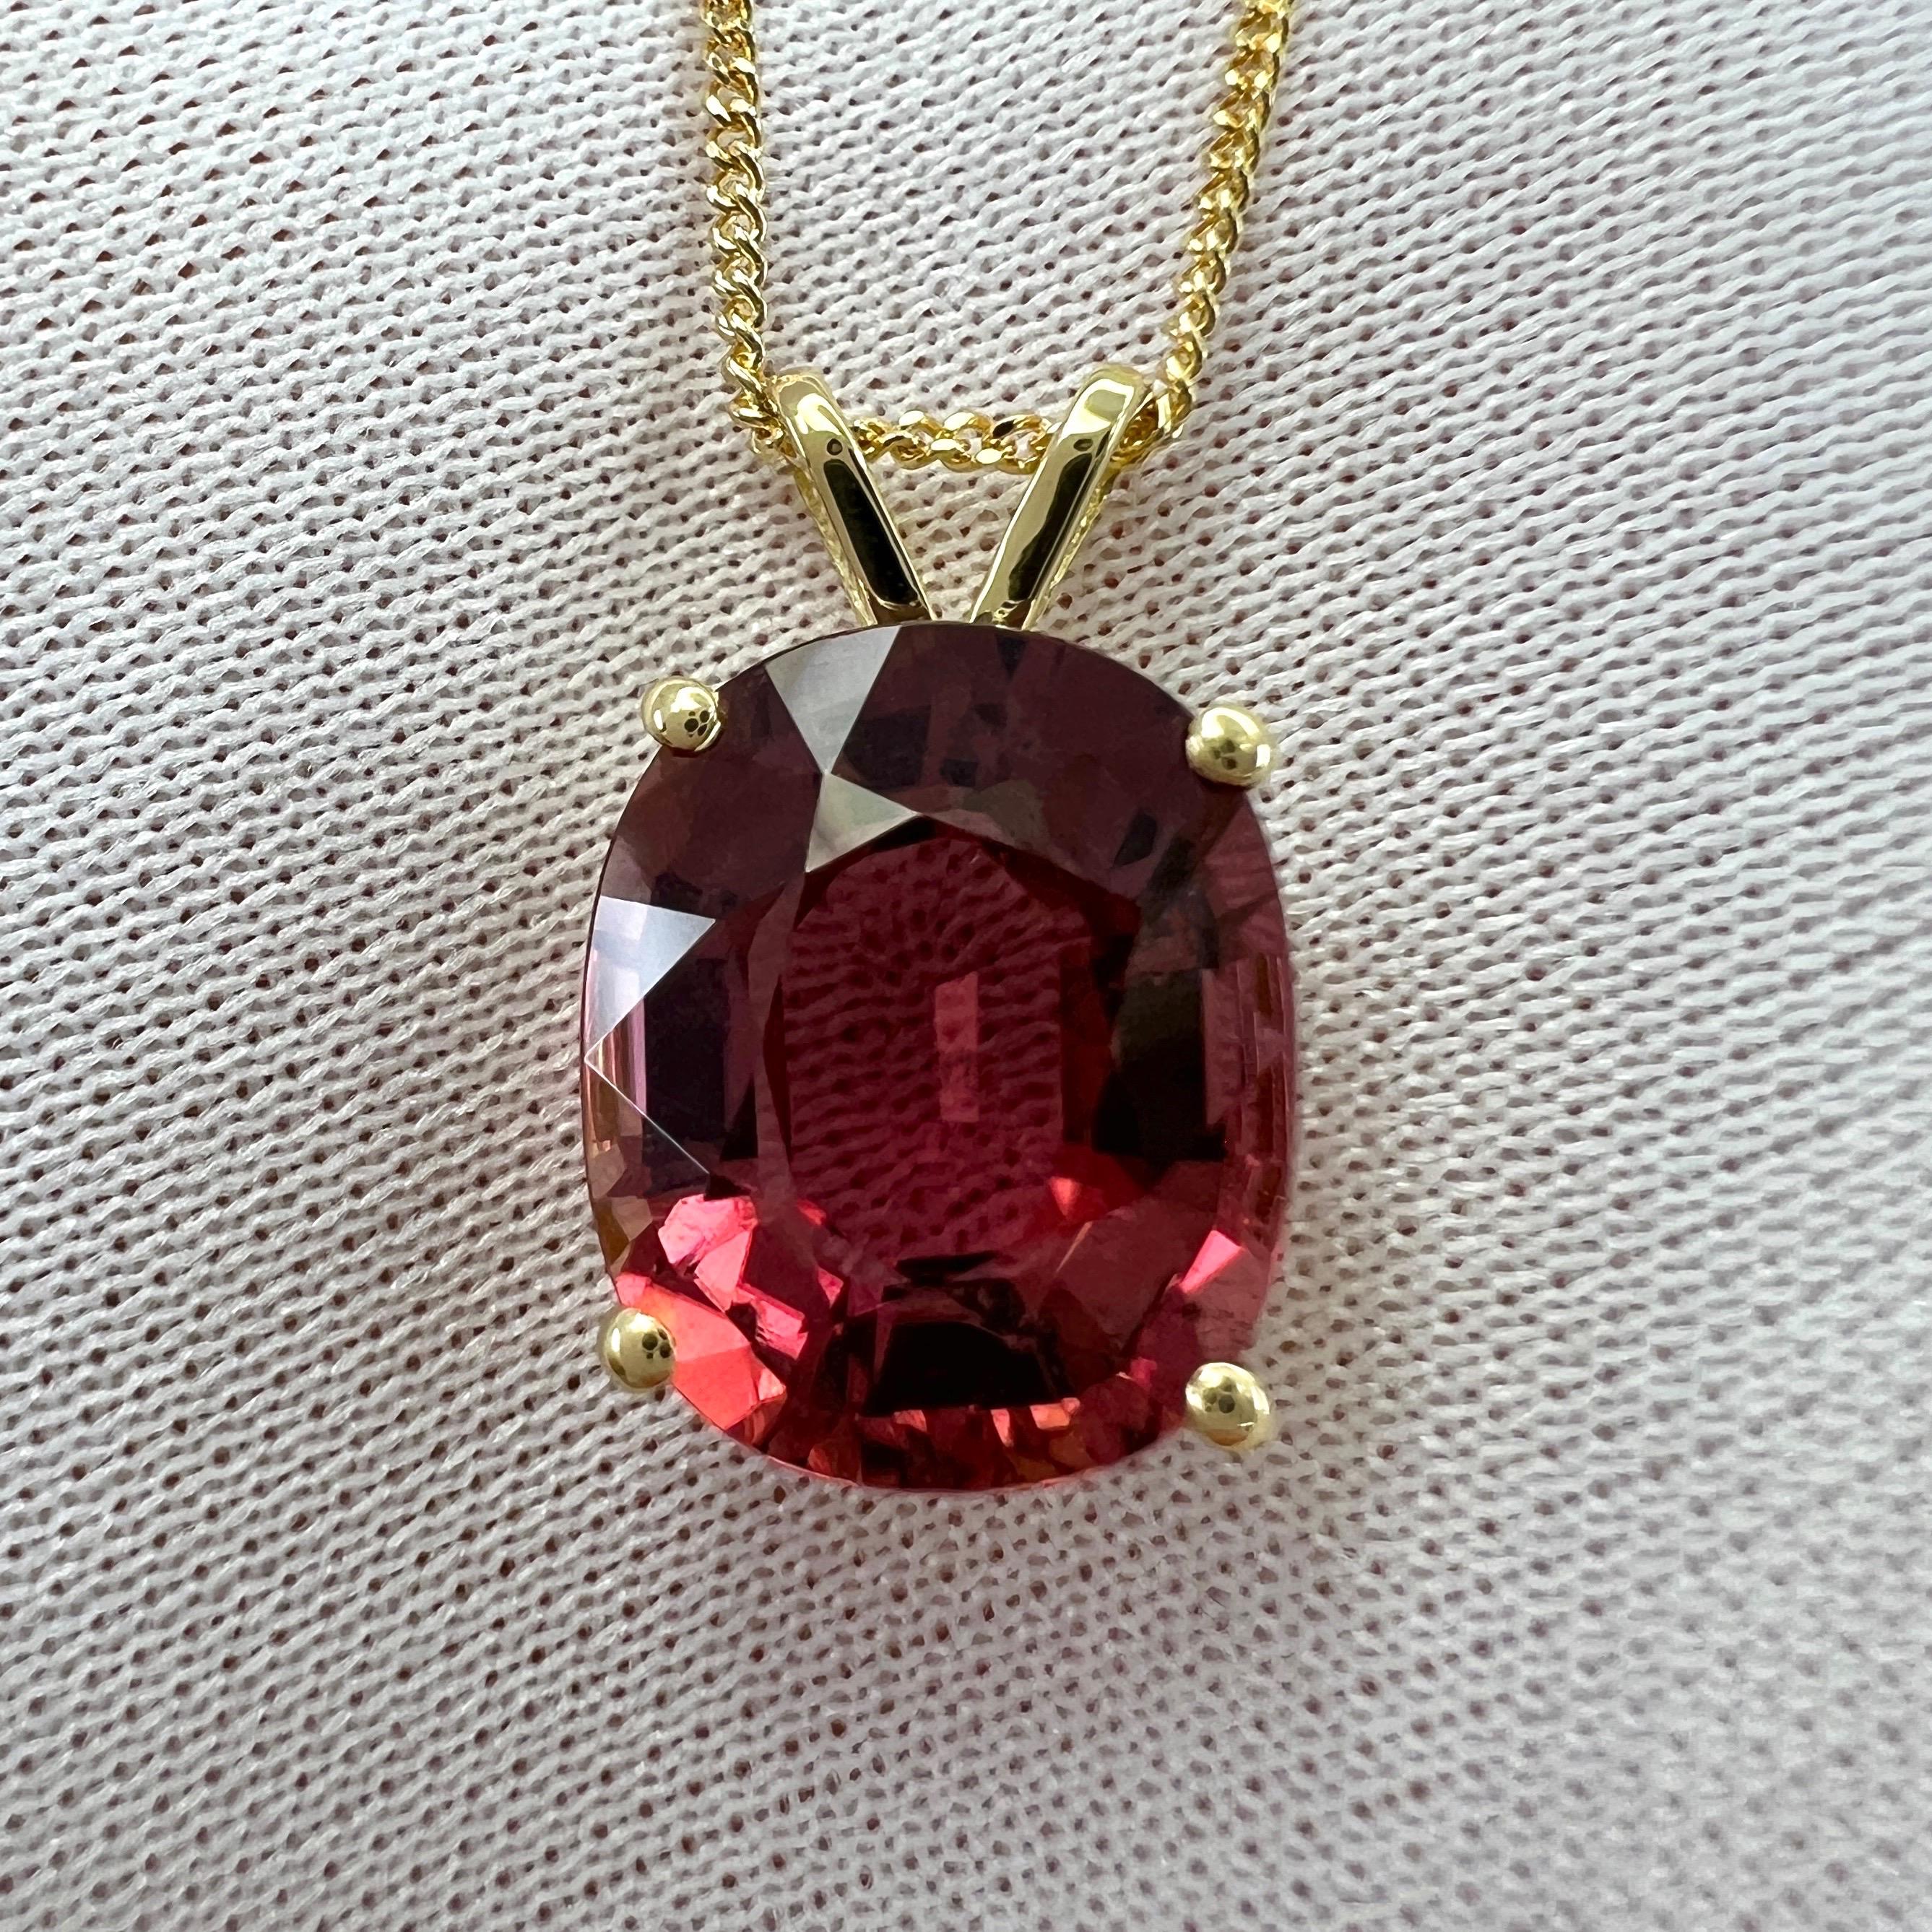 Oval Cut 5.35ct Pink Orange Rubellite Tourmaline Oval 18k Yellow Gold Pendant Necklace For Sale